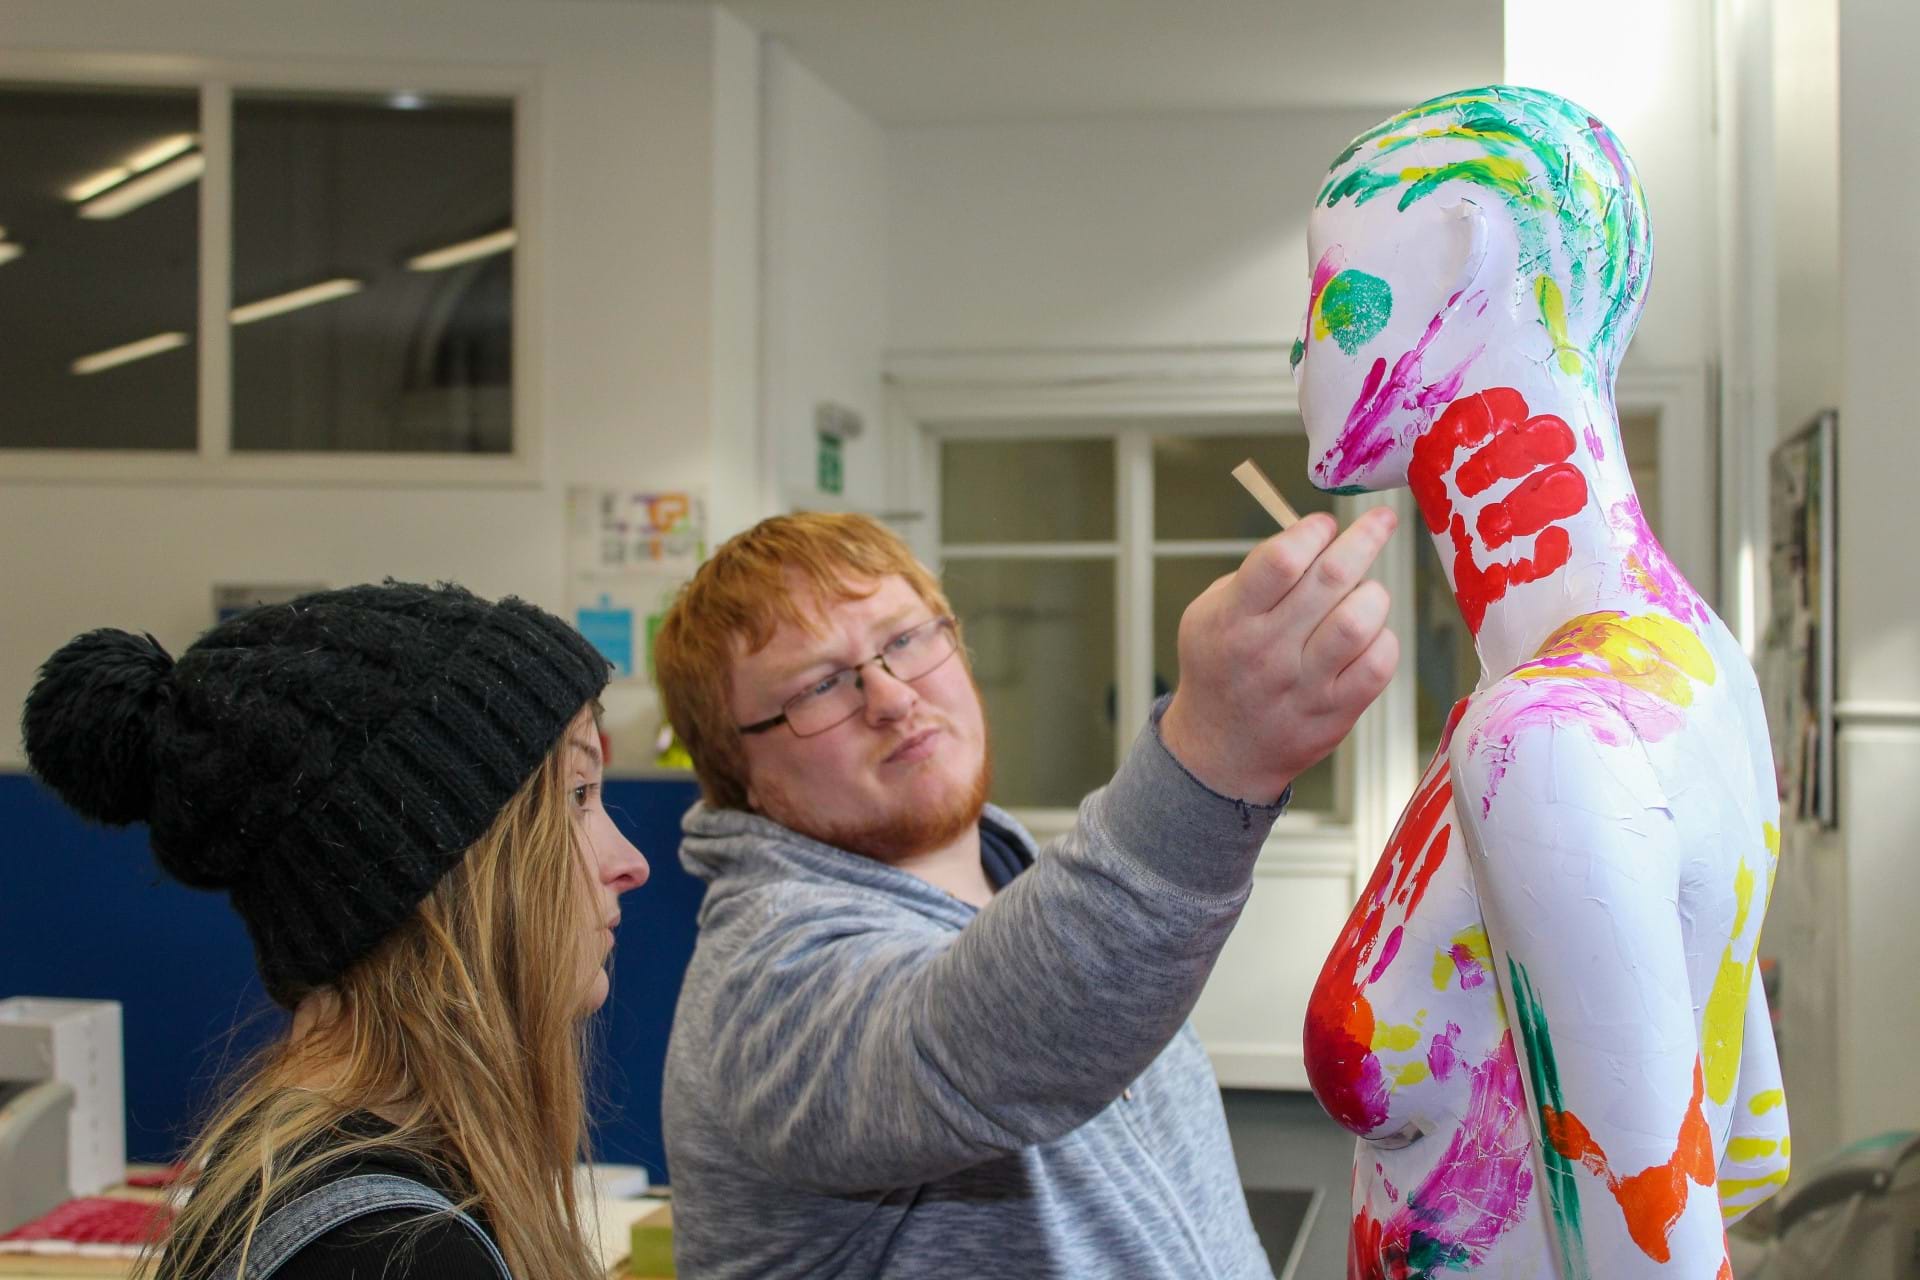 Students Robyn McMillan and Jamie Haddow turn a store mannequin into a games controller